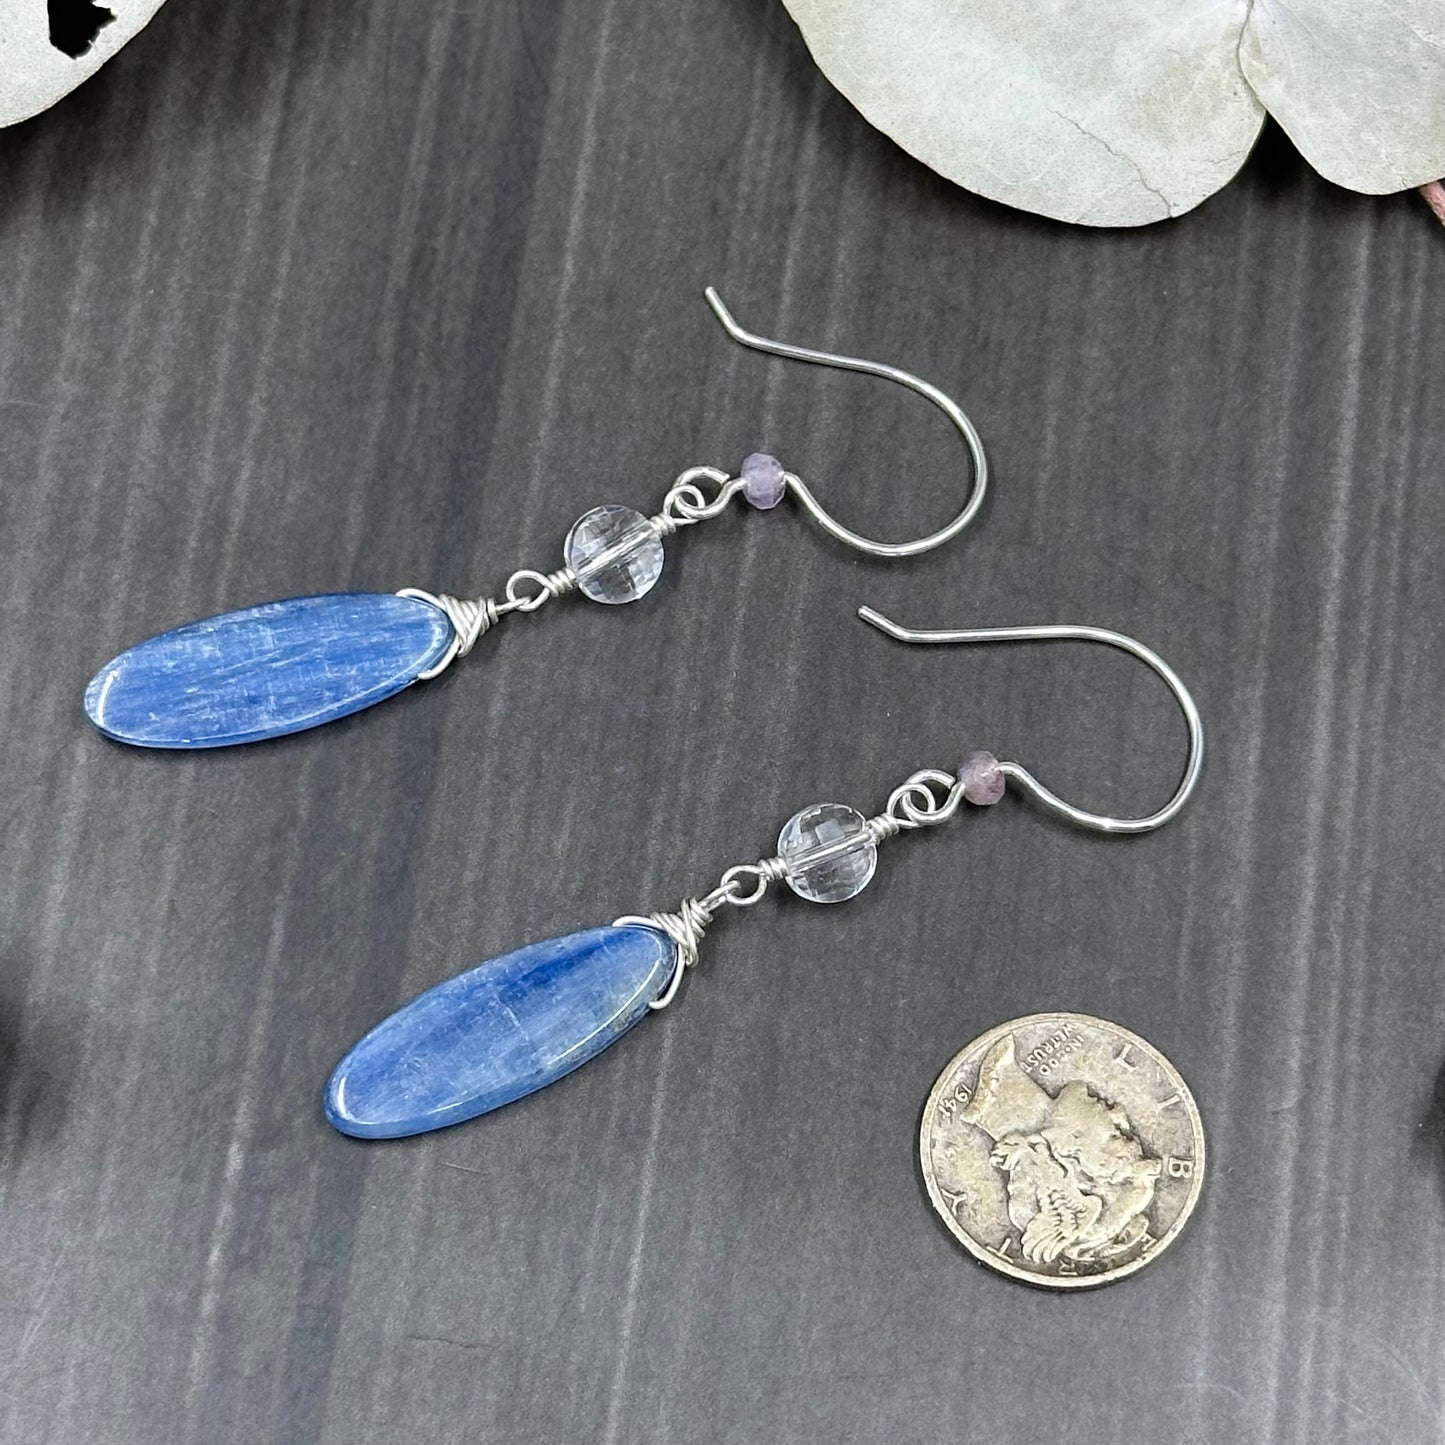 Kyanite, Quartz, and Cacoxenite Earrings in Sterling Silver